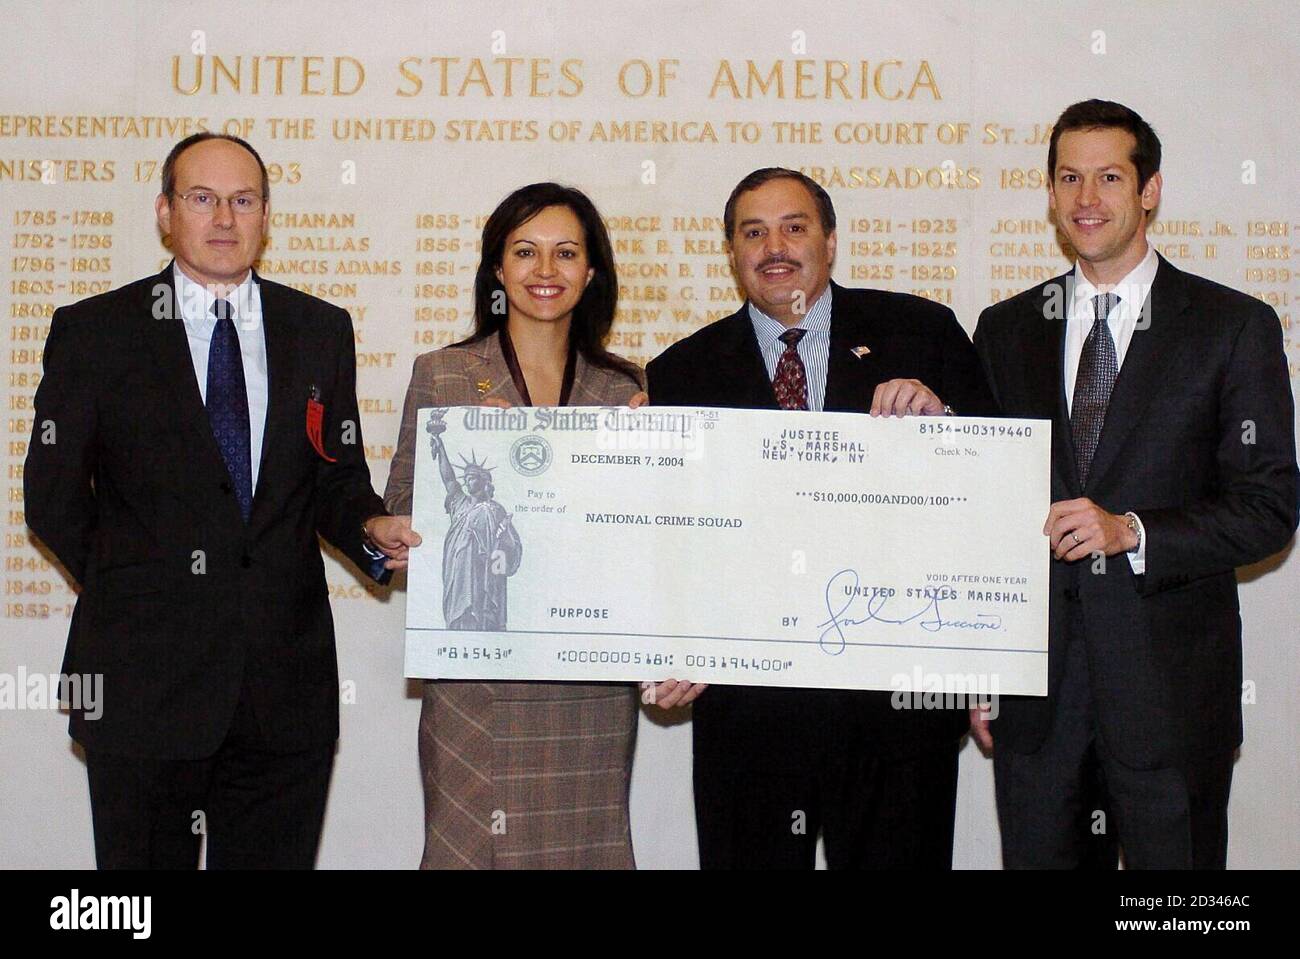 Home Office Minister Caroline Flint receiving a cheque for 5.7 million at the US Embassy in London from Tony Placido, special agent in charge of the US Drug Enforcement Administration in New York with Trevor Pearce (left) from the National Crime and Boyd Johnson (right) from the US Drug Enforcement Administration. The money is half of a $20 million dollar haul resulting from a joint US/UK confiscation order against a Colombian drug trafficker and will be used by the National Crime Squad to tackle crime in the UK. Stock Photo